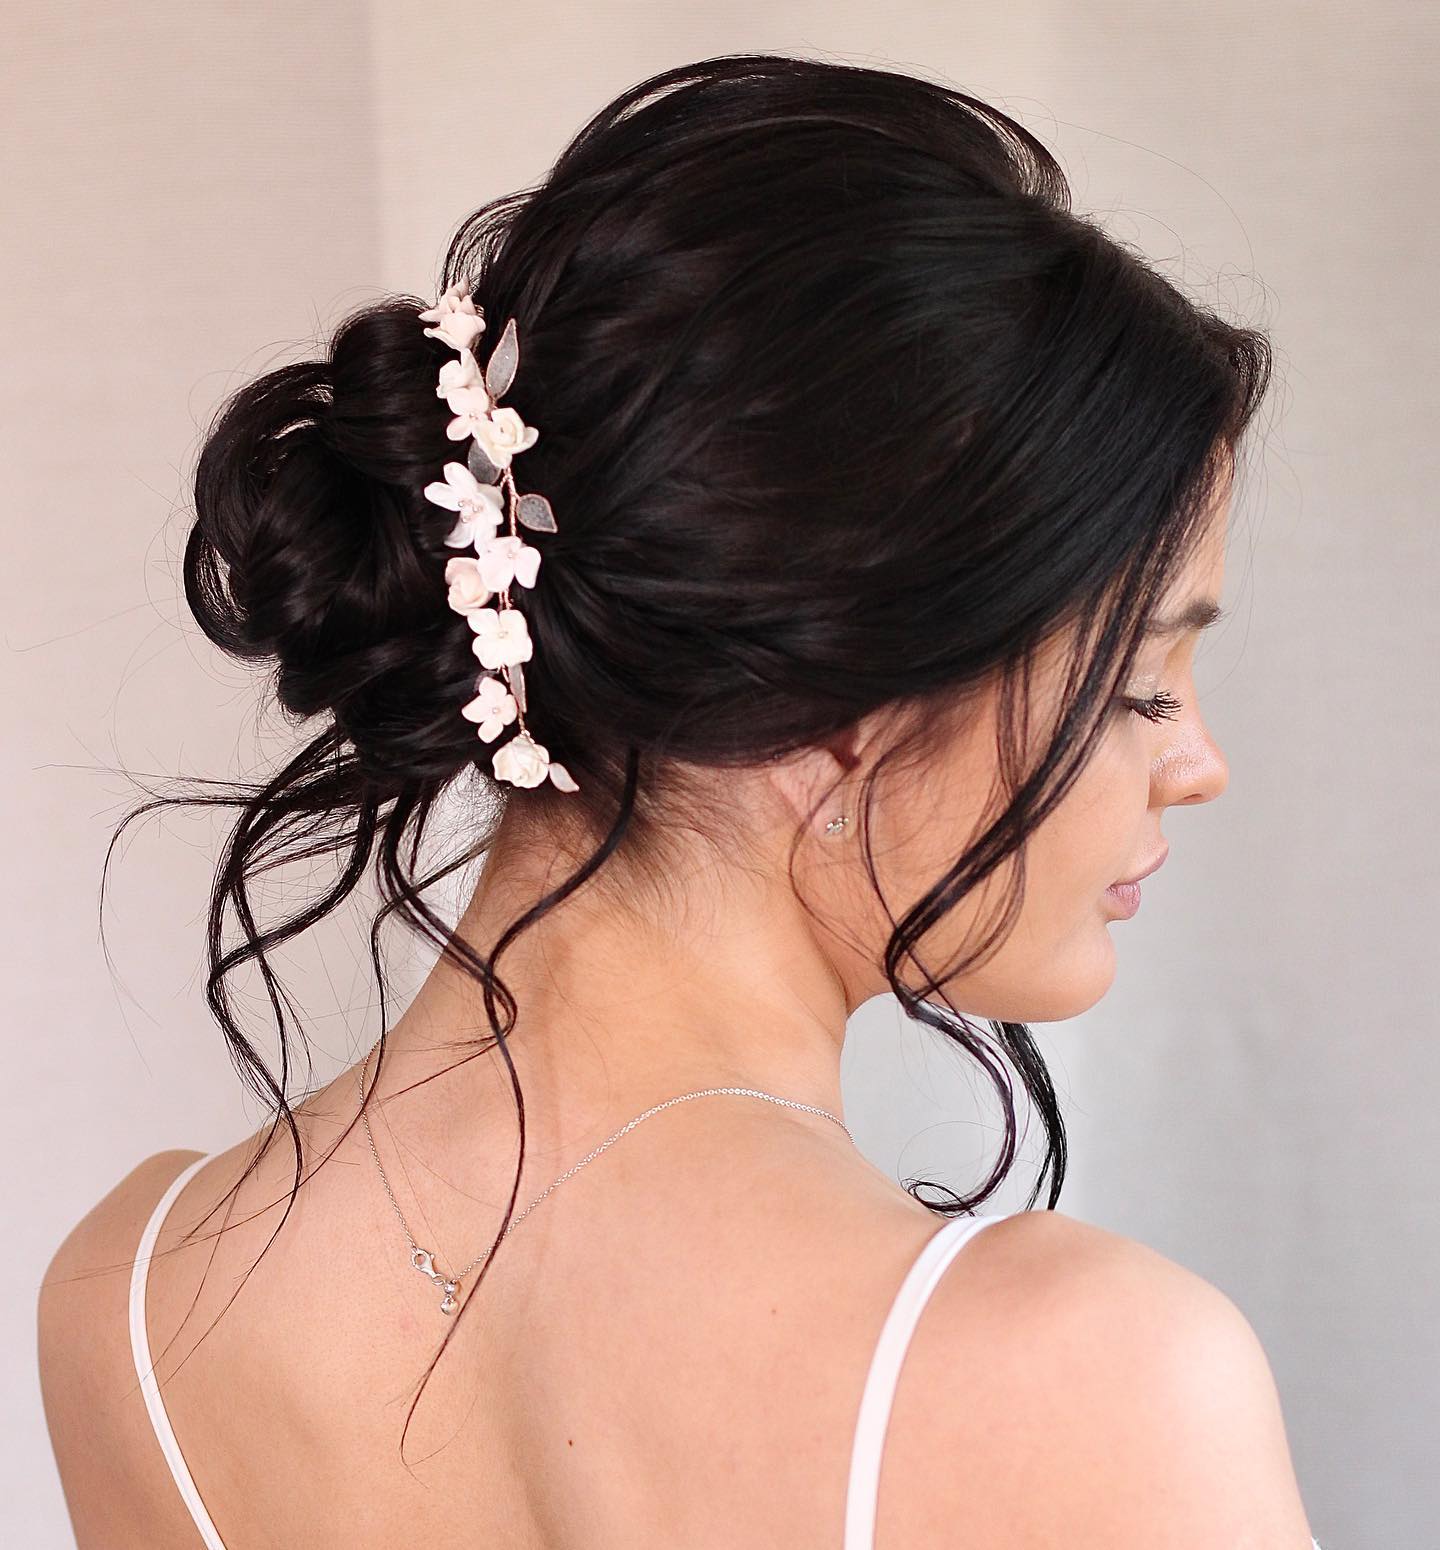 50 Romantic Wedding Hairstyles to Bring the Bride’s Image to Perfection